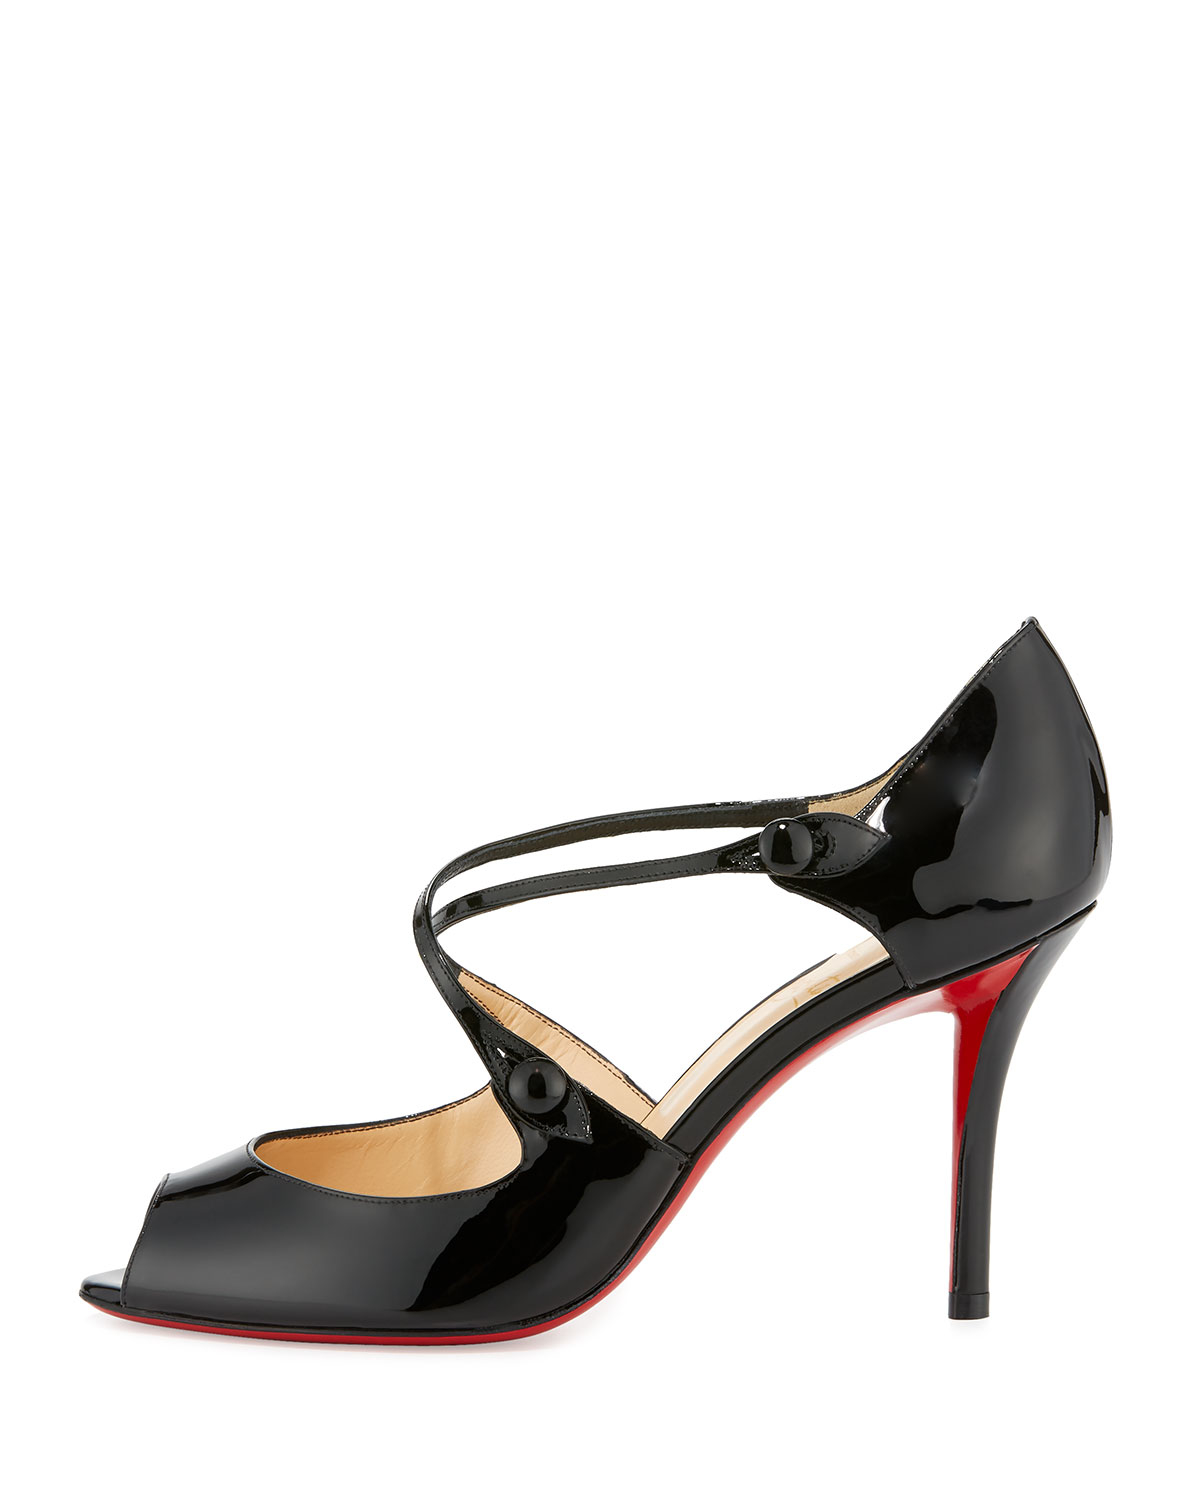 knockoff christian louboutin shoes - Christian louboutin Debriditoe Crossover Patent Leather Pumps in ...